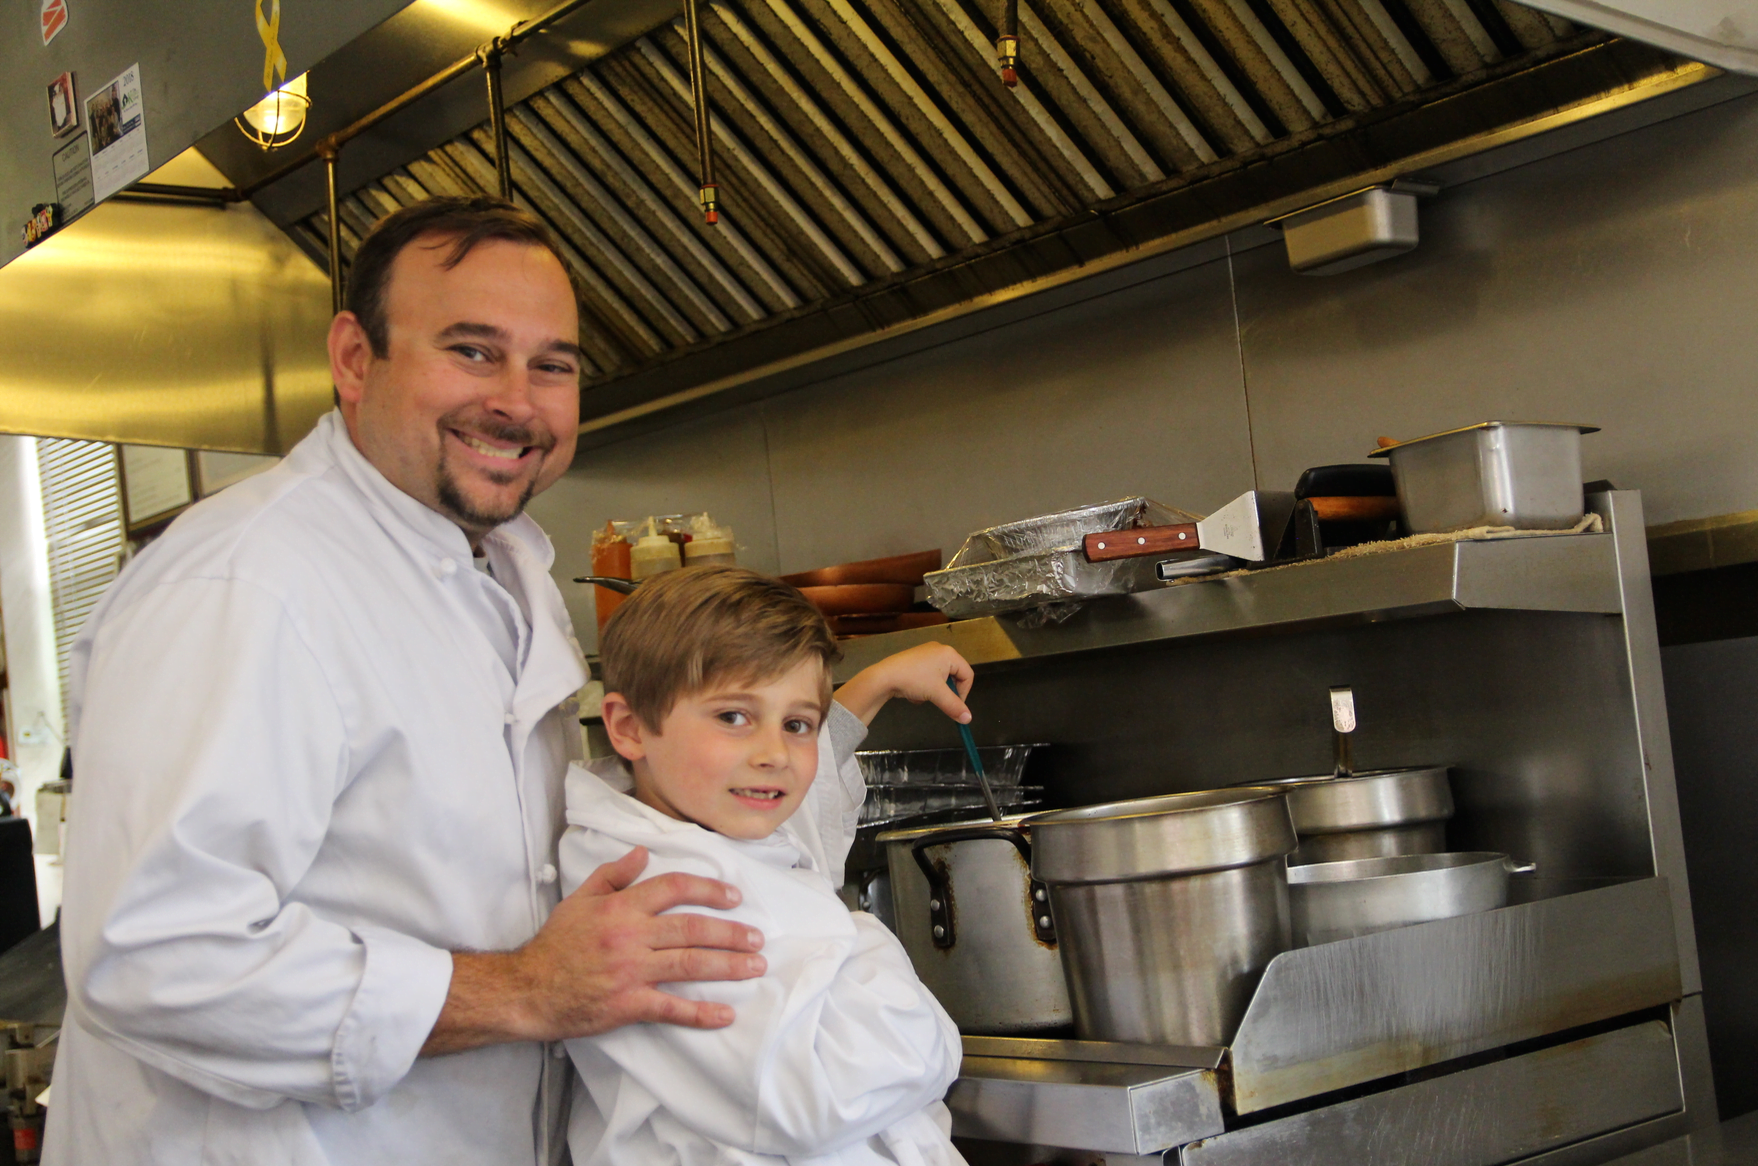 kevin Allmashy, Executive Chef/Owner Executive Corner Deli & Catering and his son Nicholas, who loves to help his dad with cooking. Mary 18, 2018 Photo: Leslie Yager